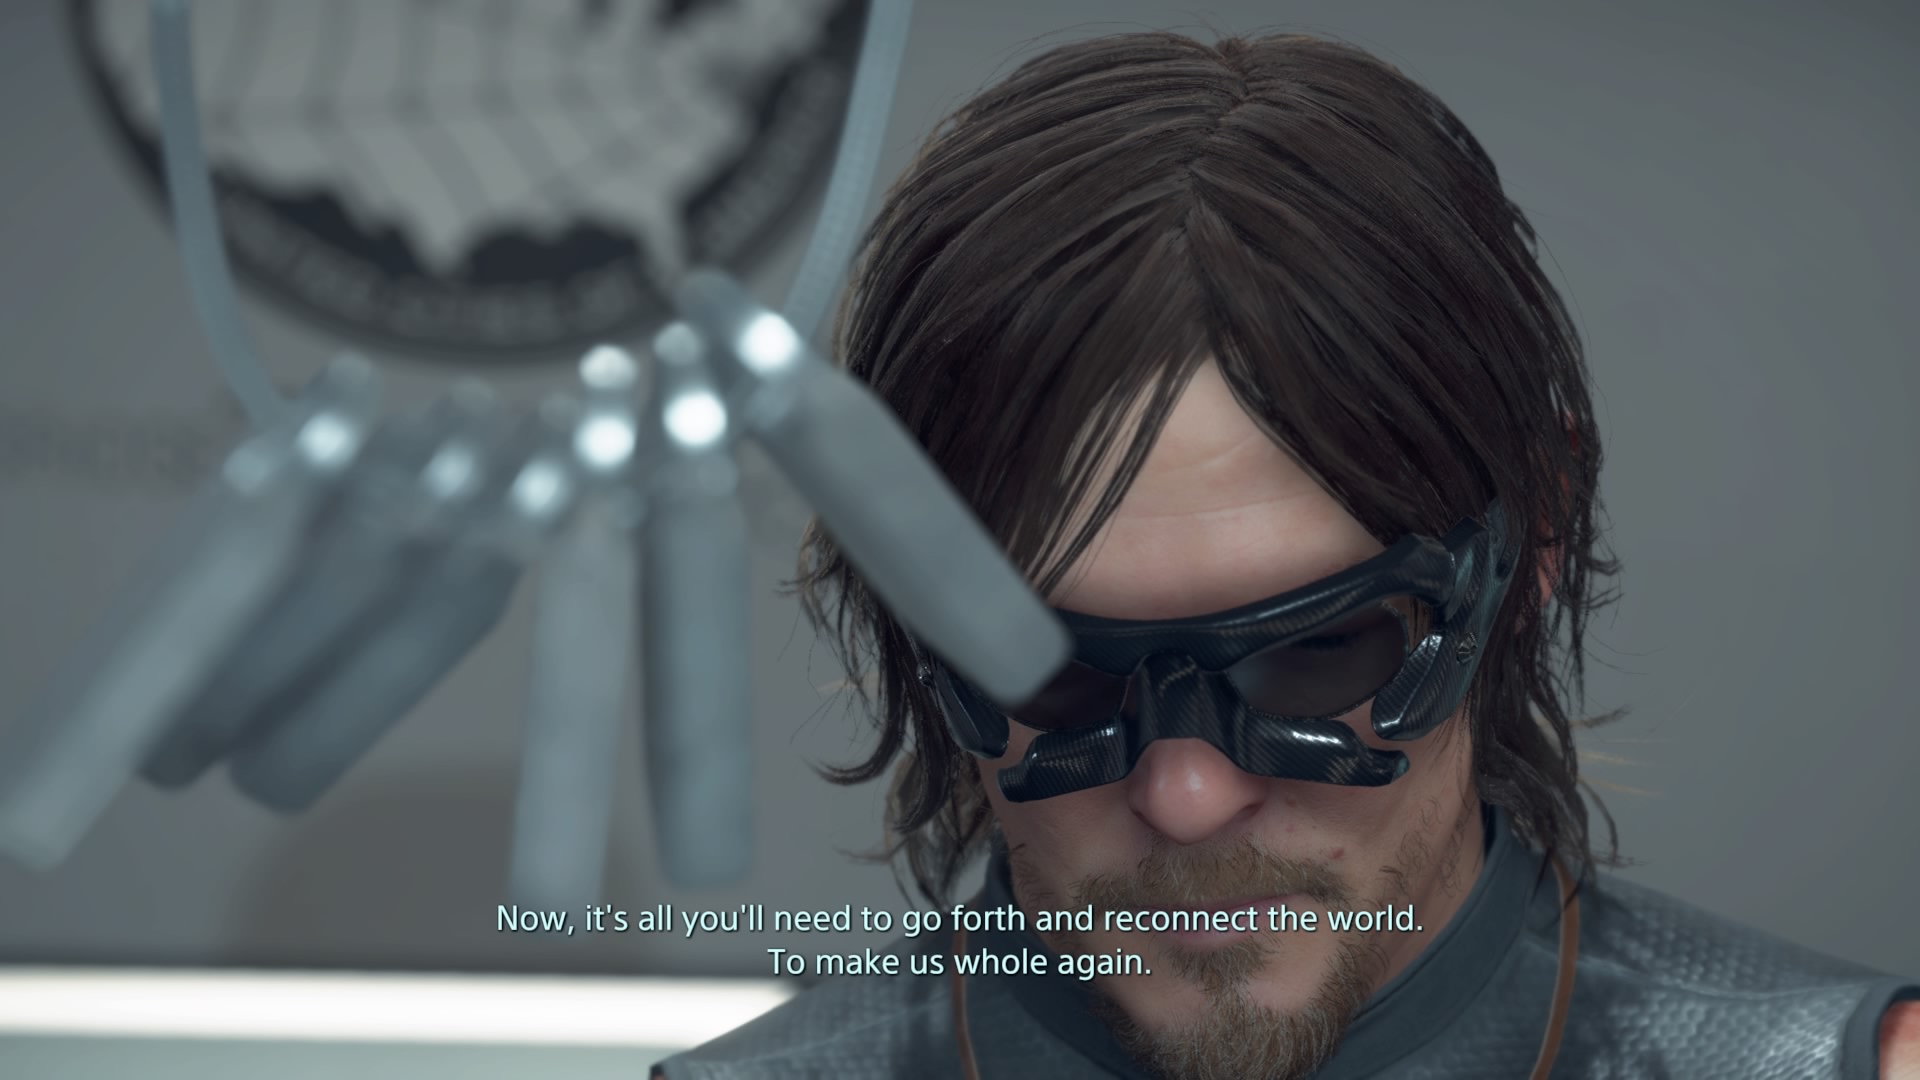 Death Stranding Is One of My Faves After Dropping the Difficulty